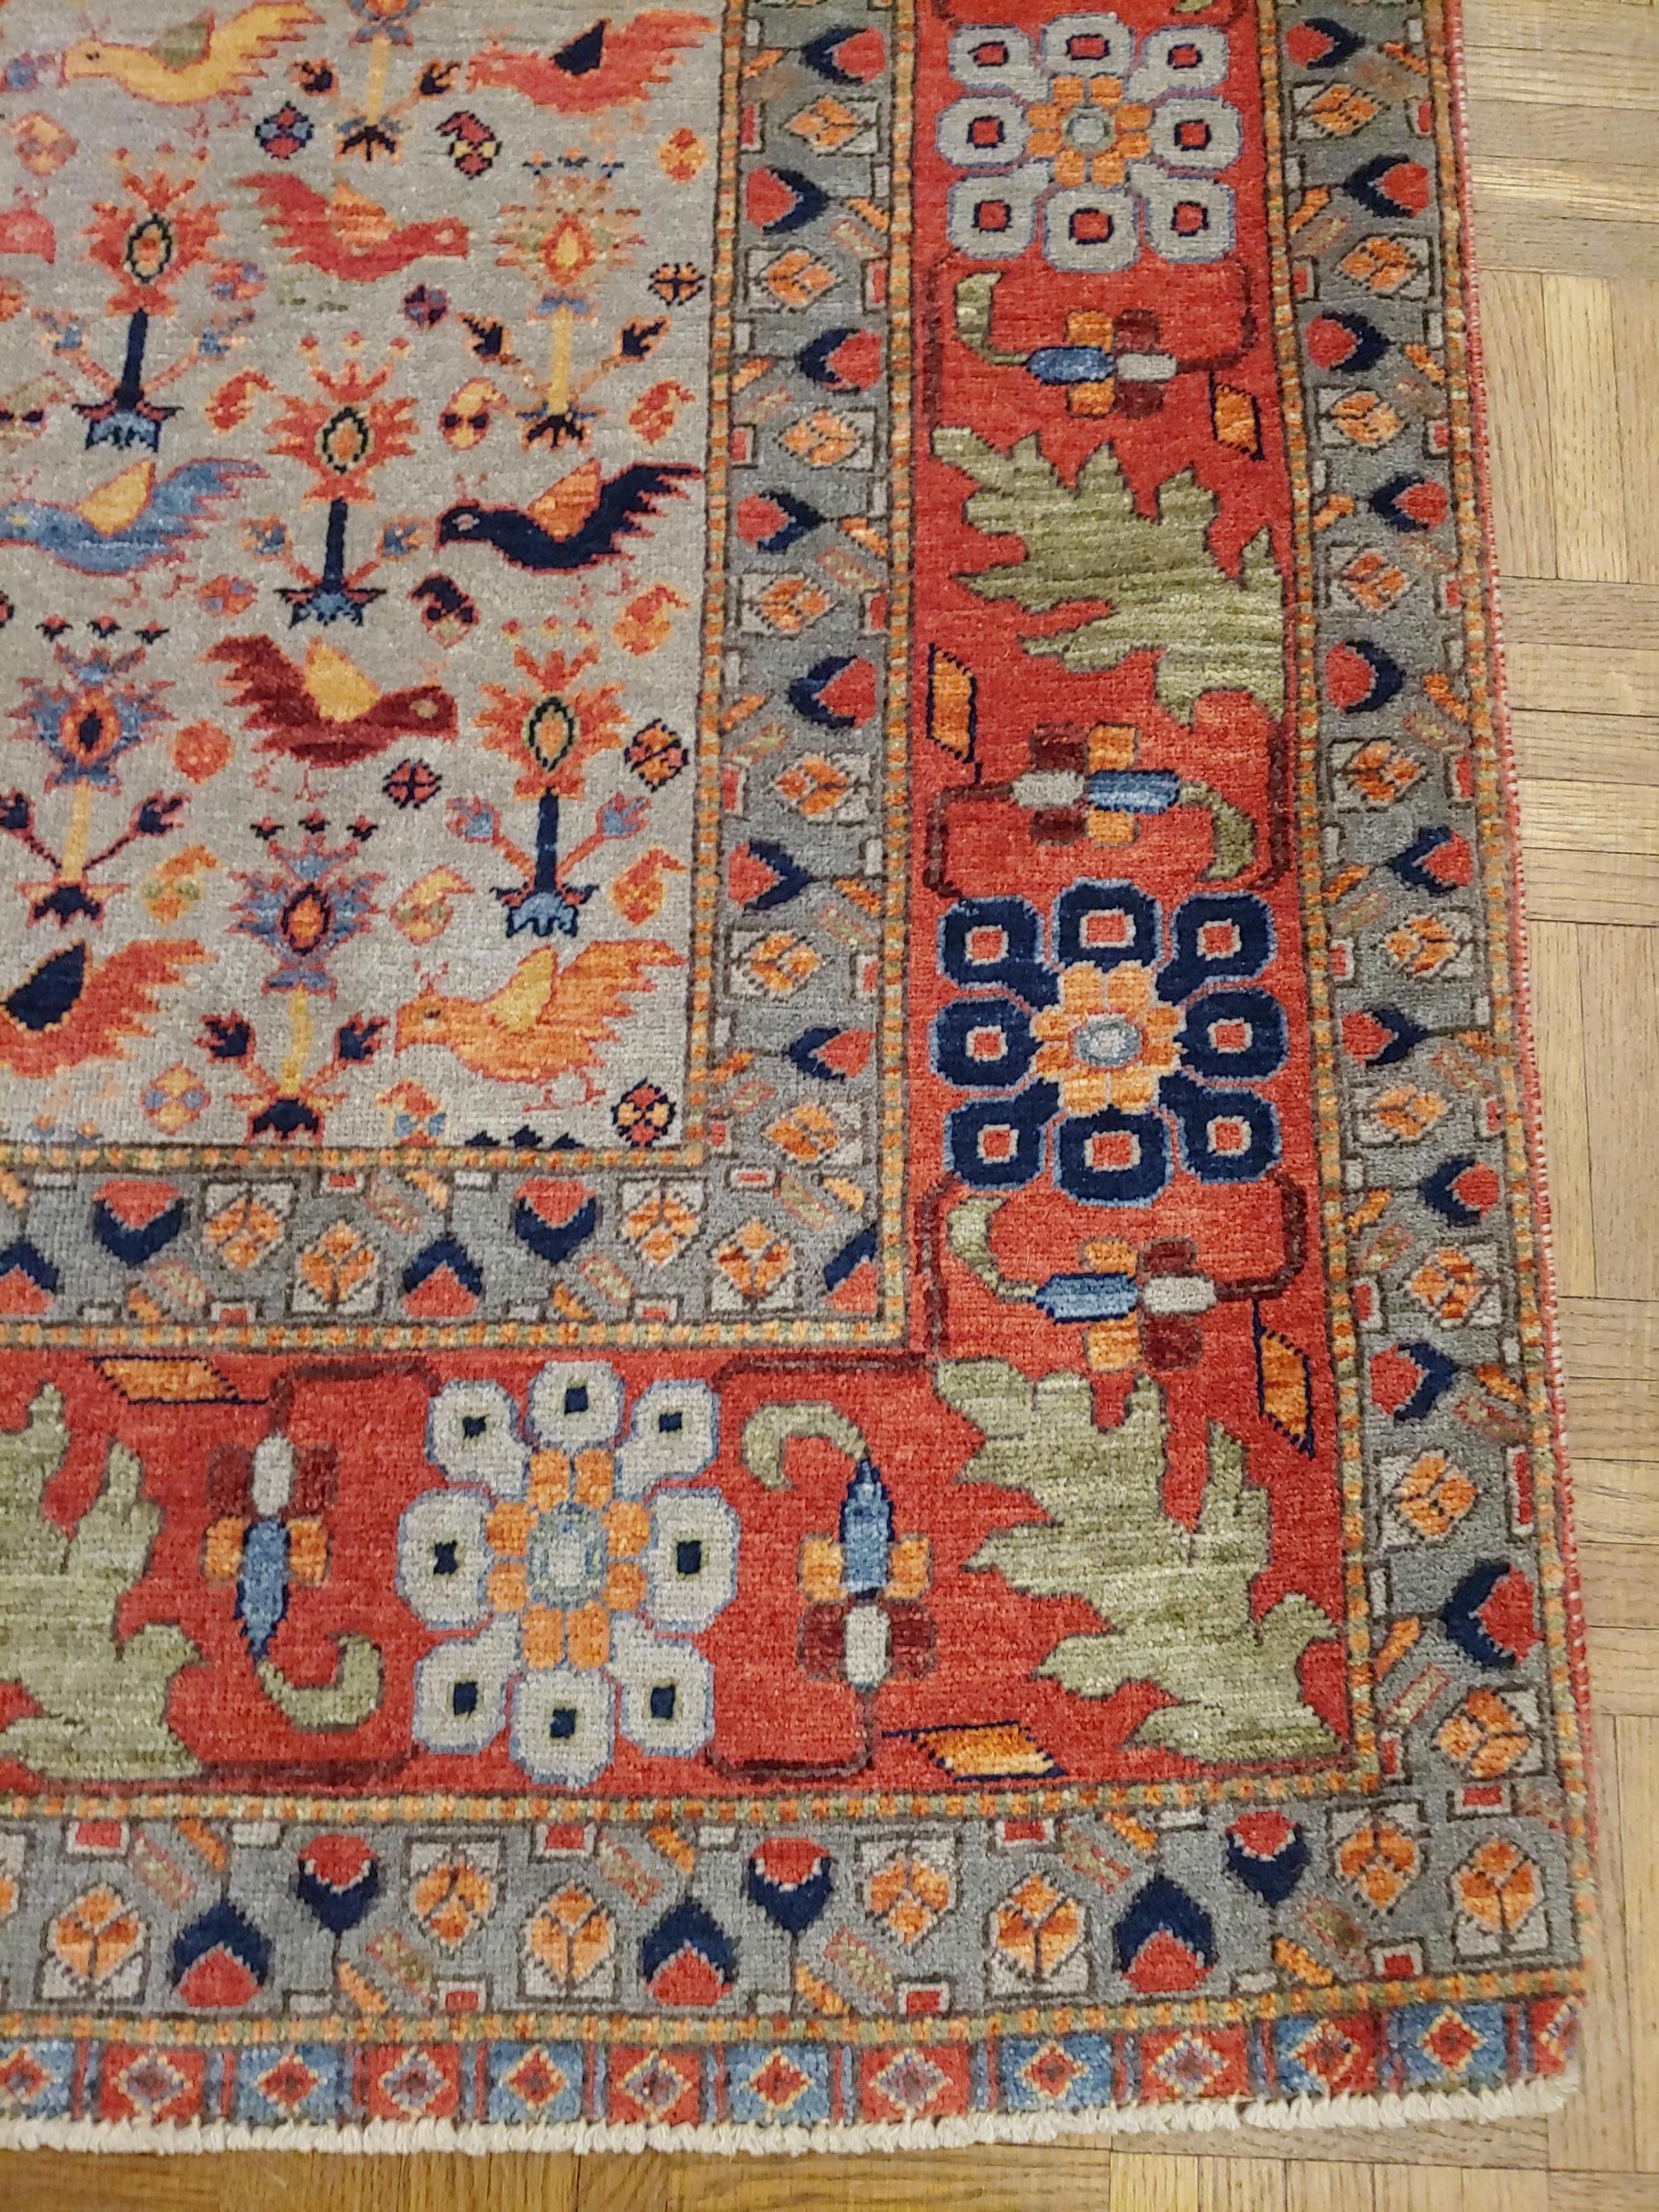 Woven New Rug From Afghanistan, Persian Qashqai-Shiraz Design, Wool, Natural Dyes 4x6  For Sale